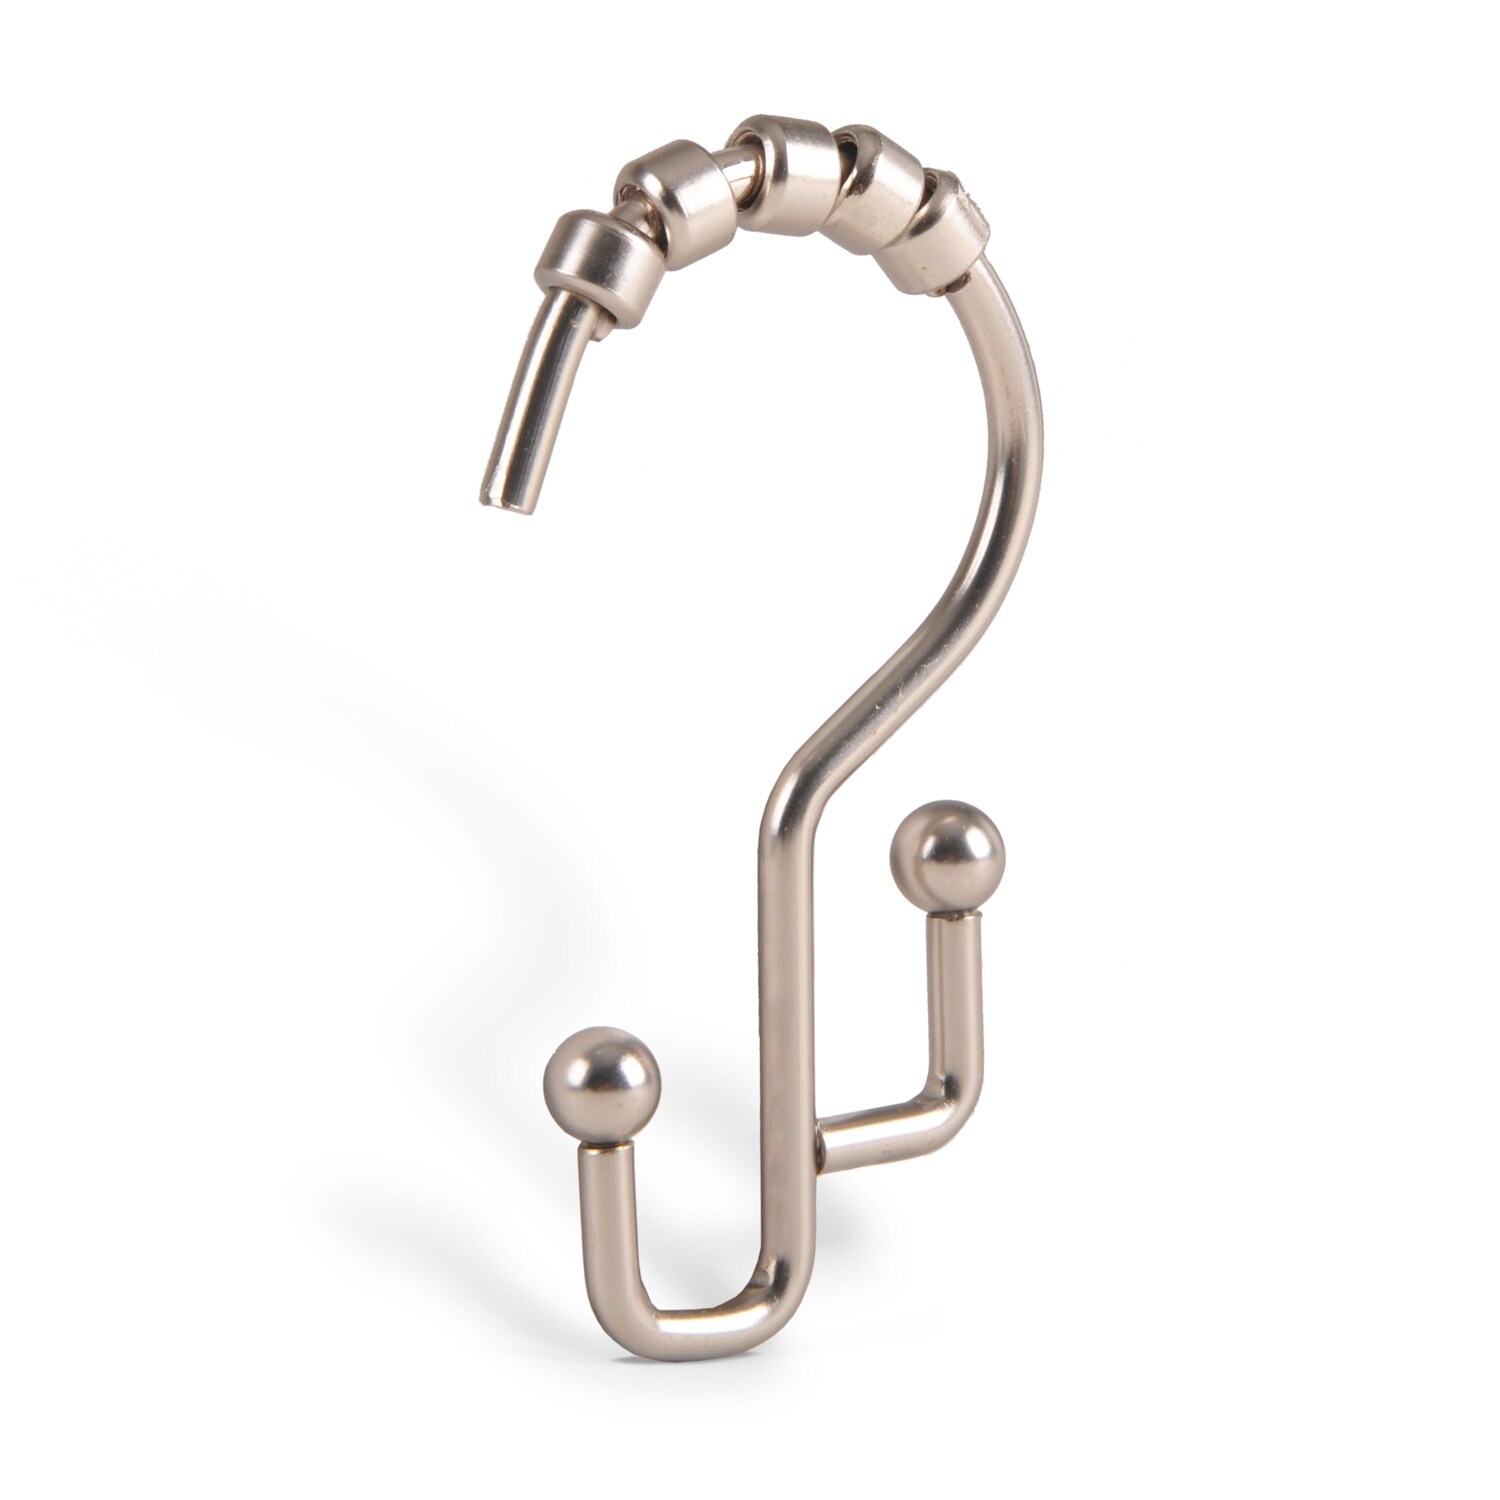 https://ak1.ostkcdn.com/images/products/is/images/direct/dd23d2a9062ffd1193bbcde057343afe6c686a6b/Utopia-Alley-Double-Roller-Shower-Hook%2C-Brushed-Nickel.jpg